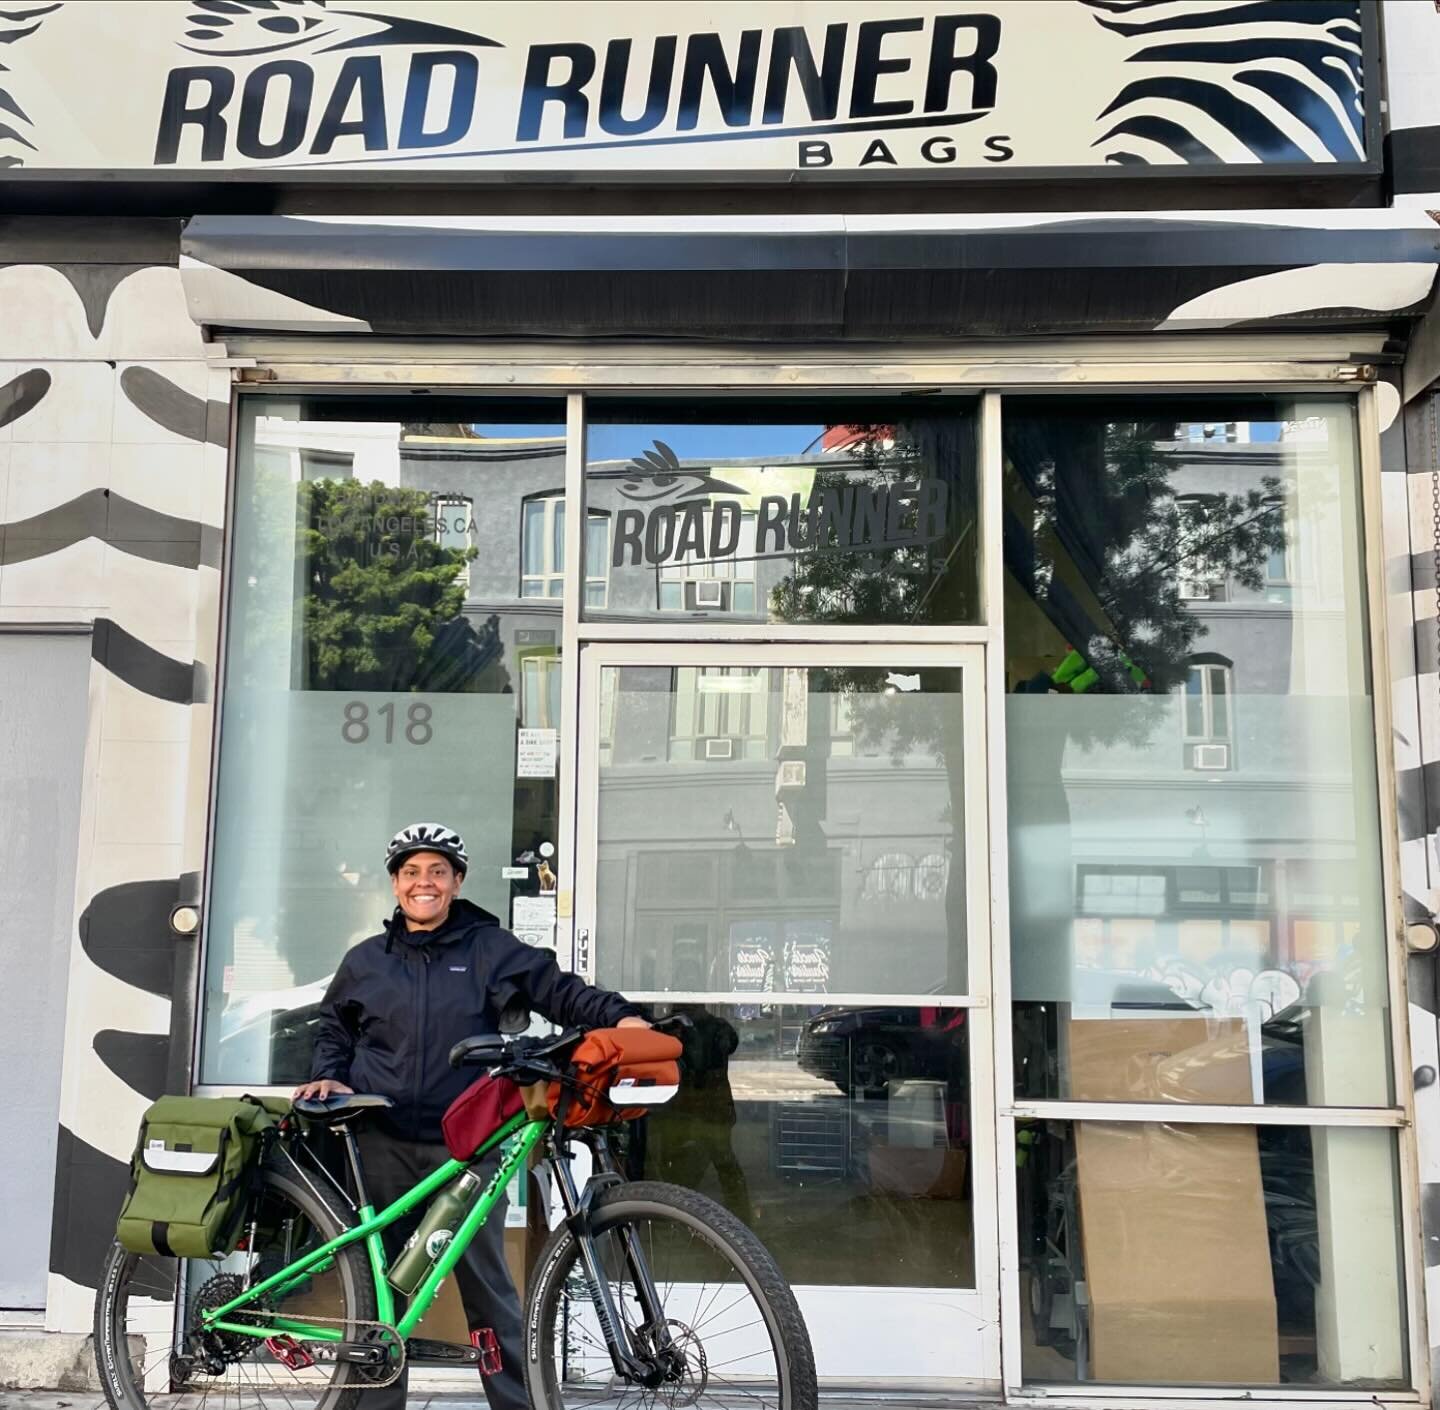 Beep, beep! Gratitude @roadrunnerbags for having me over today at the shop! 💯 LA made.  I appreciate the support you give me and other bike educators and advocates. Ride on! 

I&rsquo;m stoked about my bike adventure to connect with the Oholone land